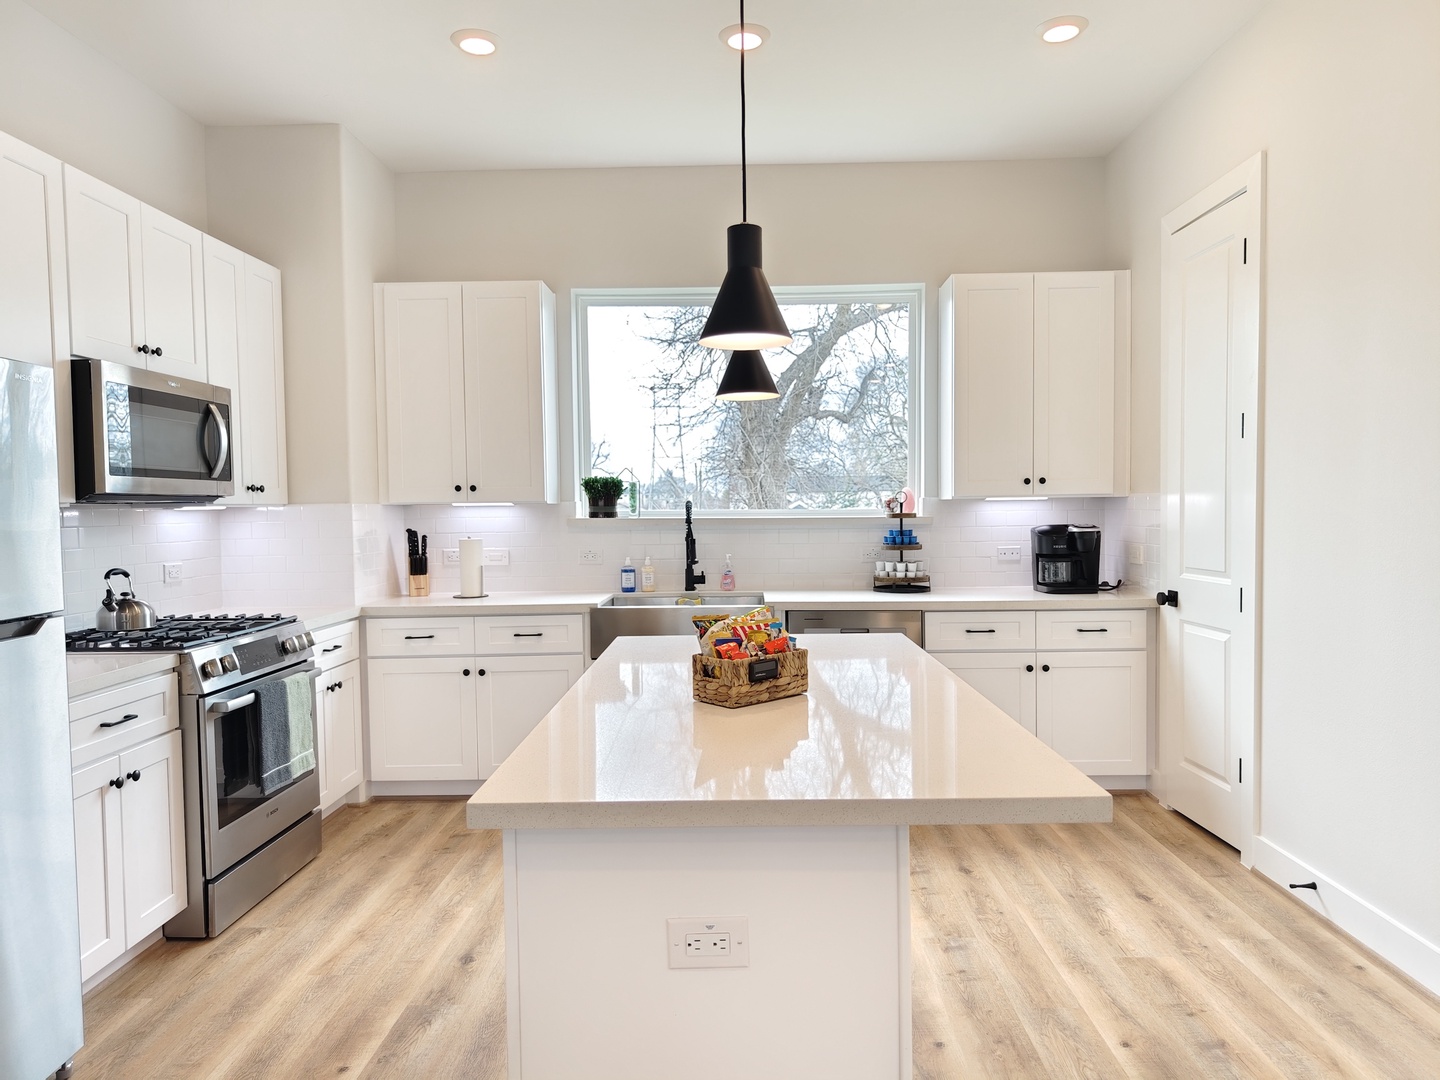 The bright, spacious kitchen offers all the comforts of home